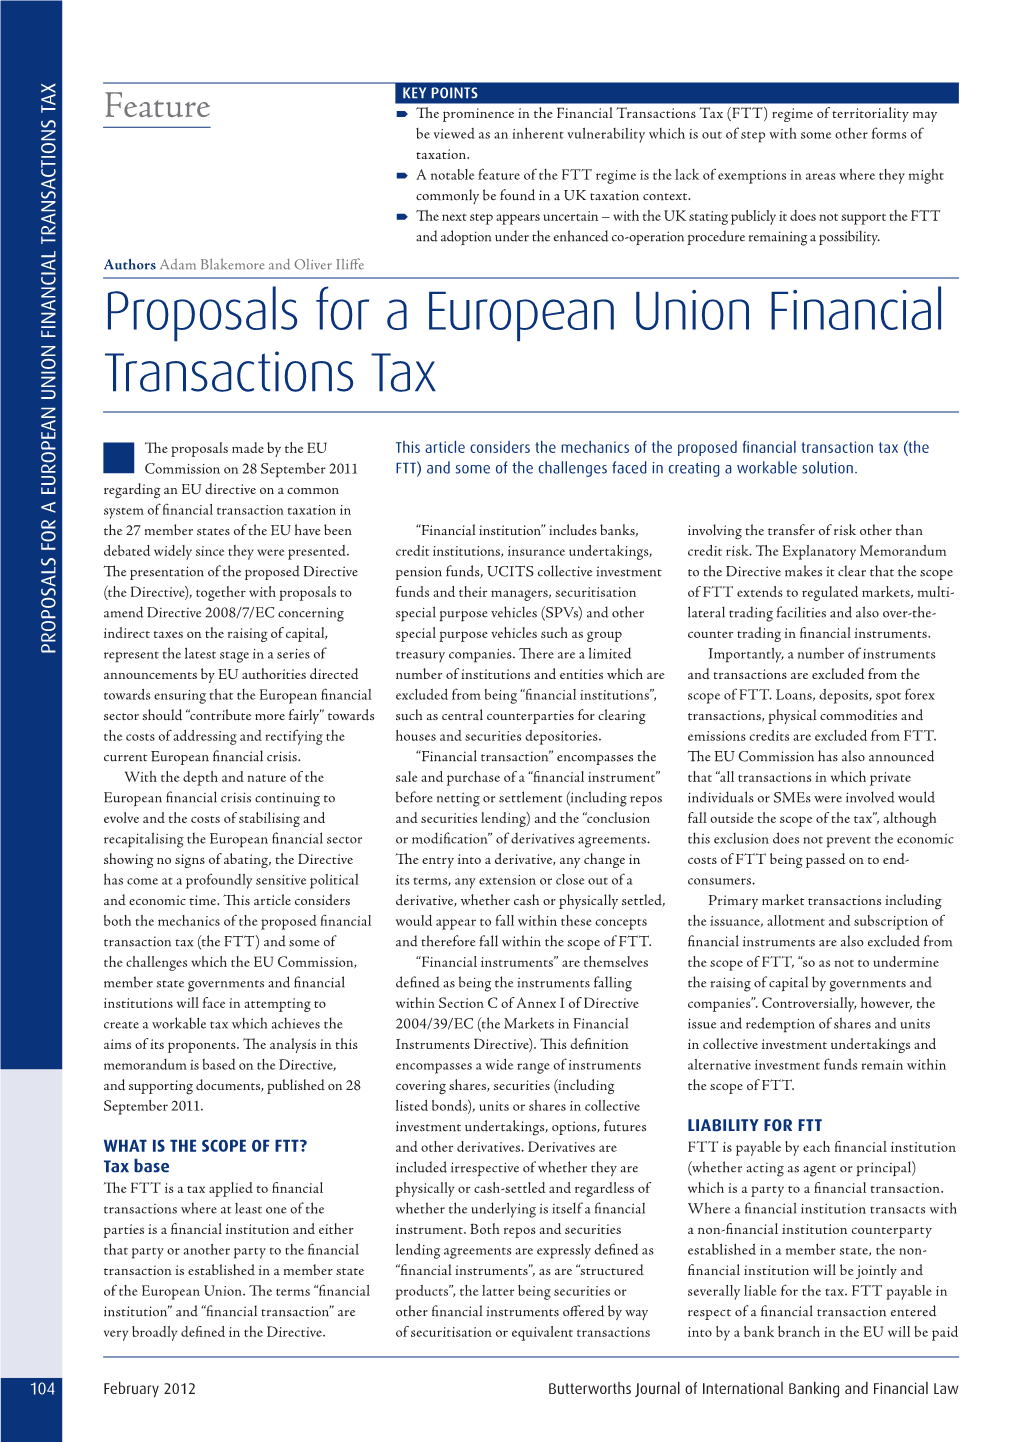 Proposals for a European Union Financial Transactions Tax